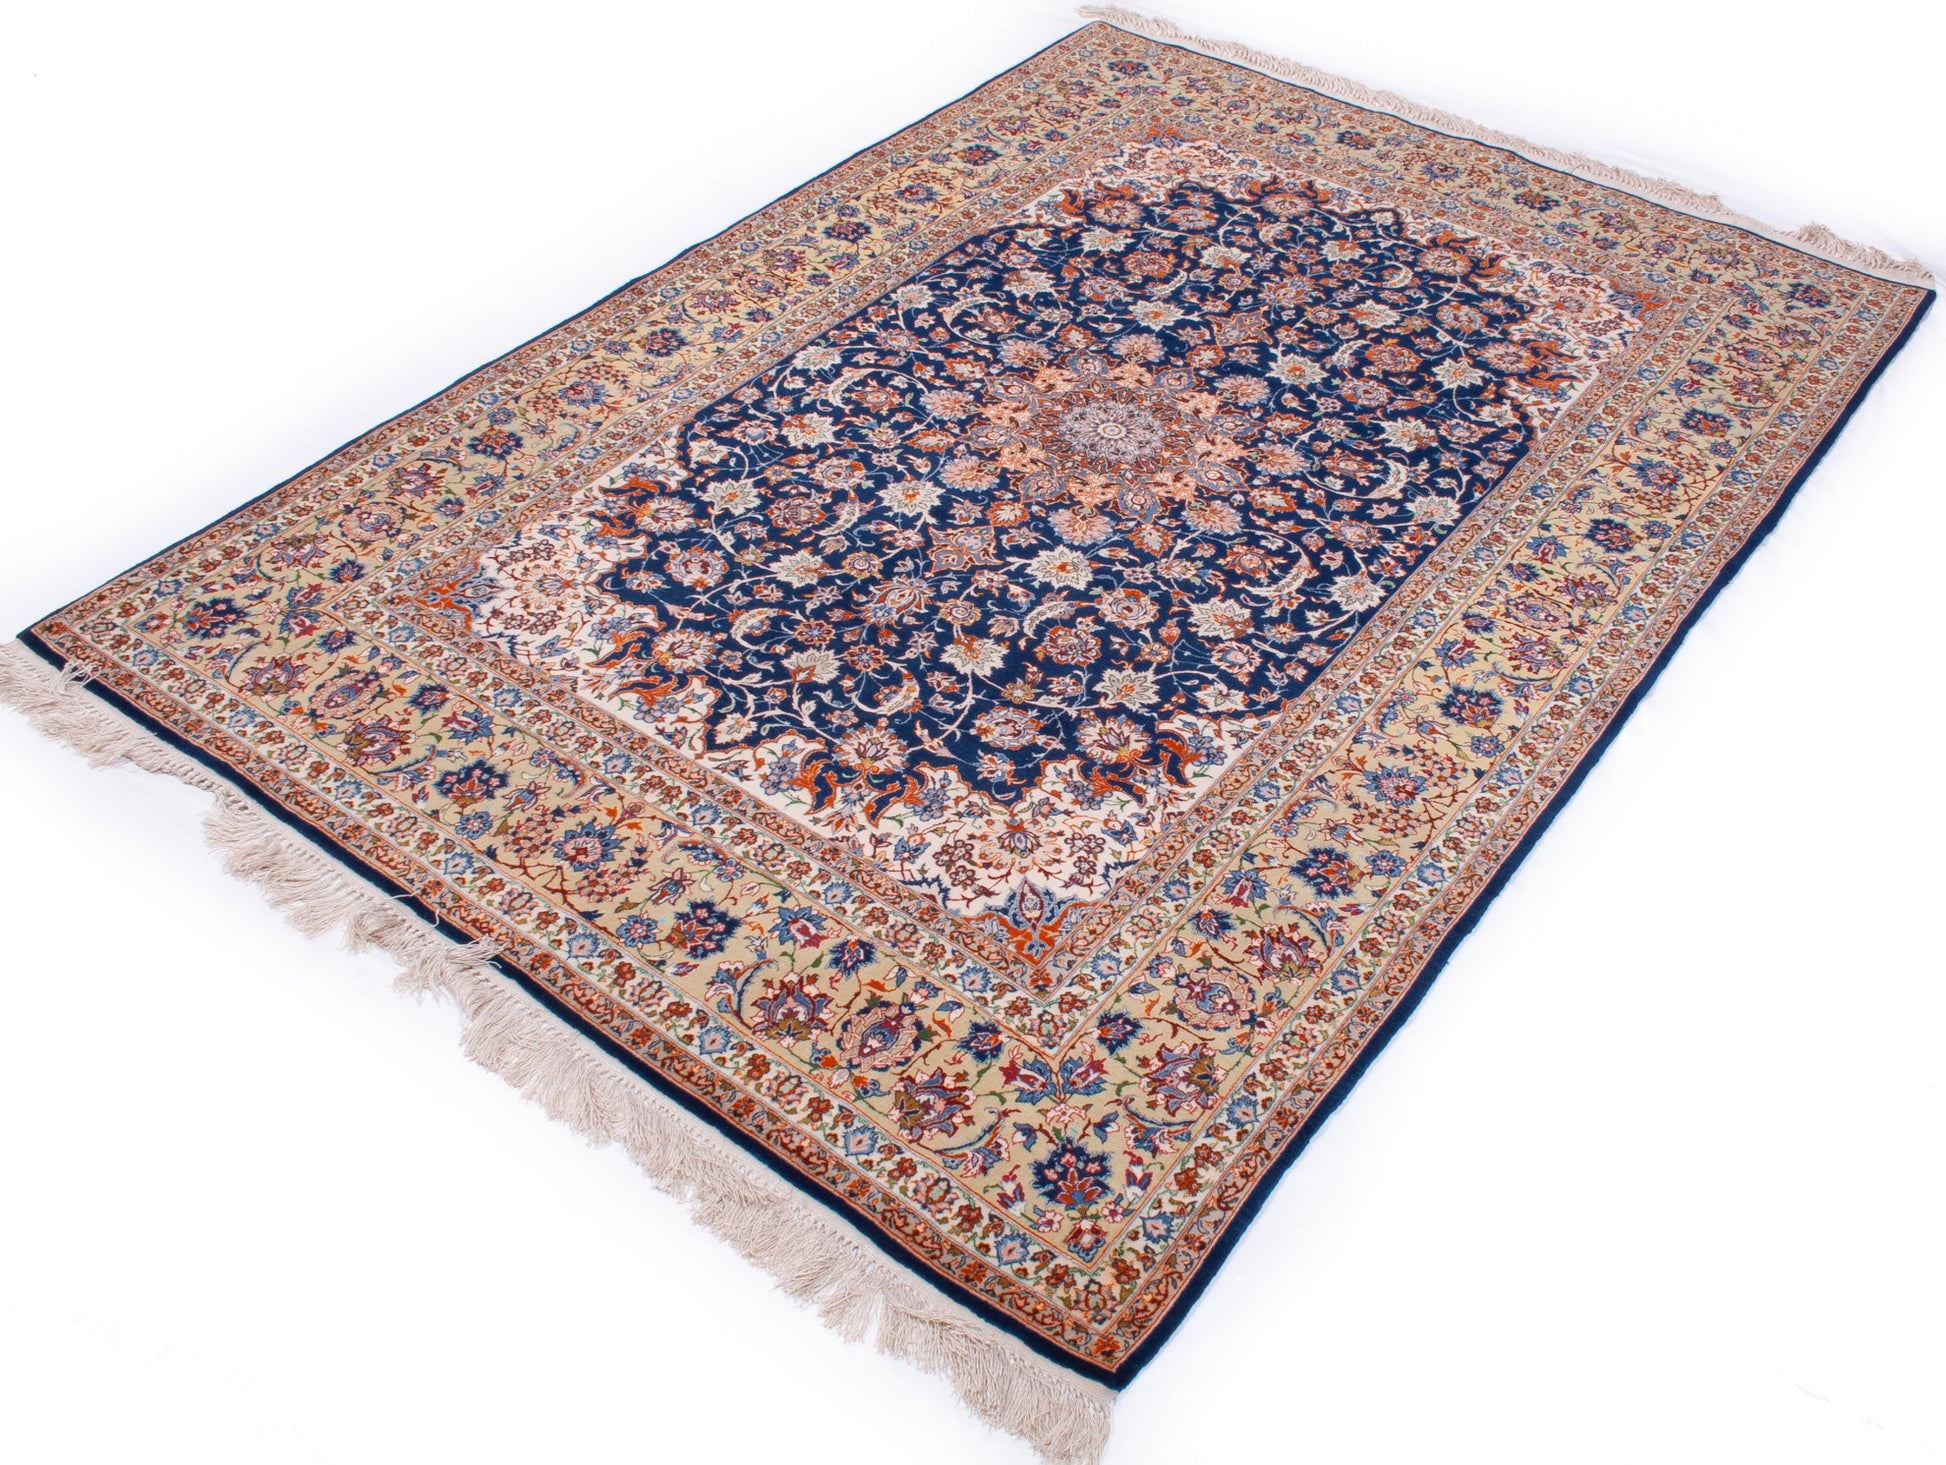 19781-Isfahan Hand-Knotted/Handmade Persian Rug/Carpet Traditional  Authentic/Size: 7'7''x 5'2